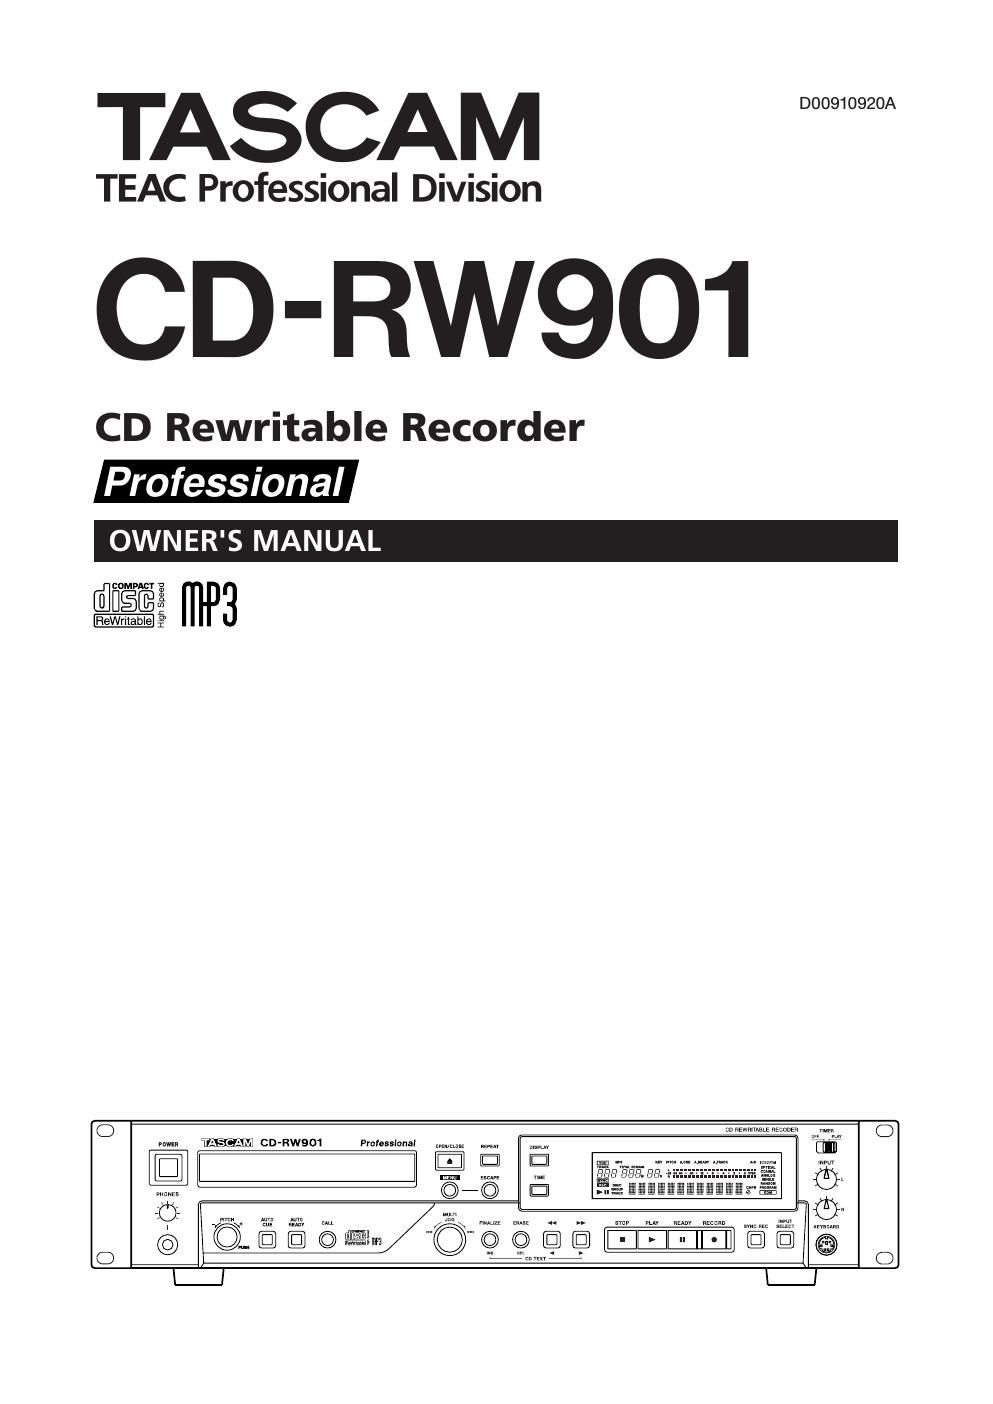 Tascam CD RW 901 Owners Manual